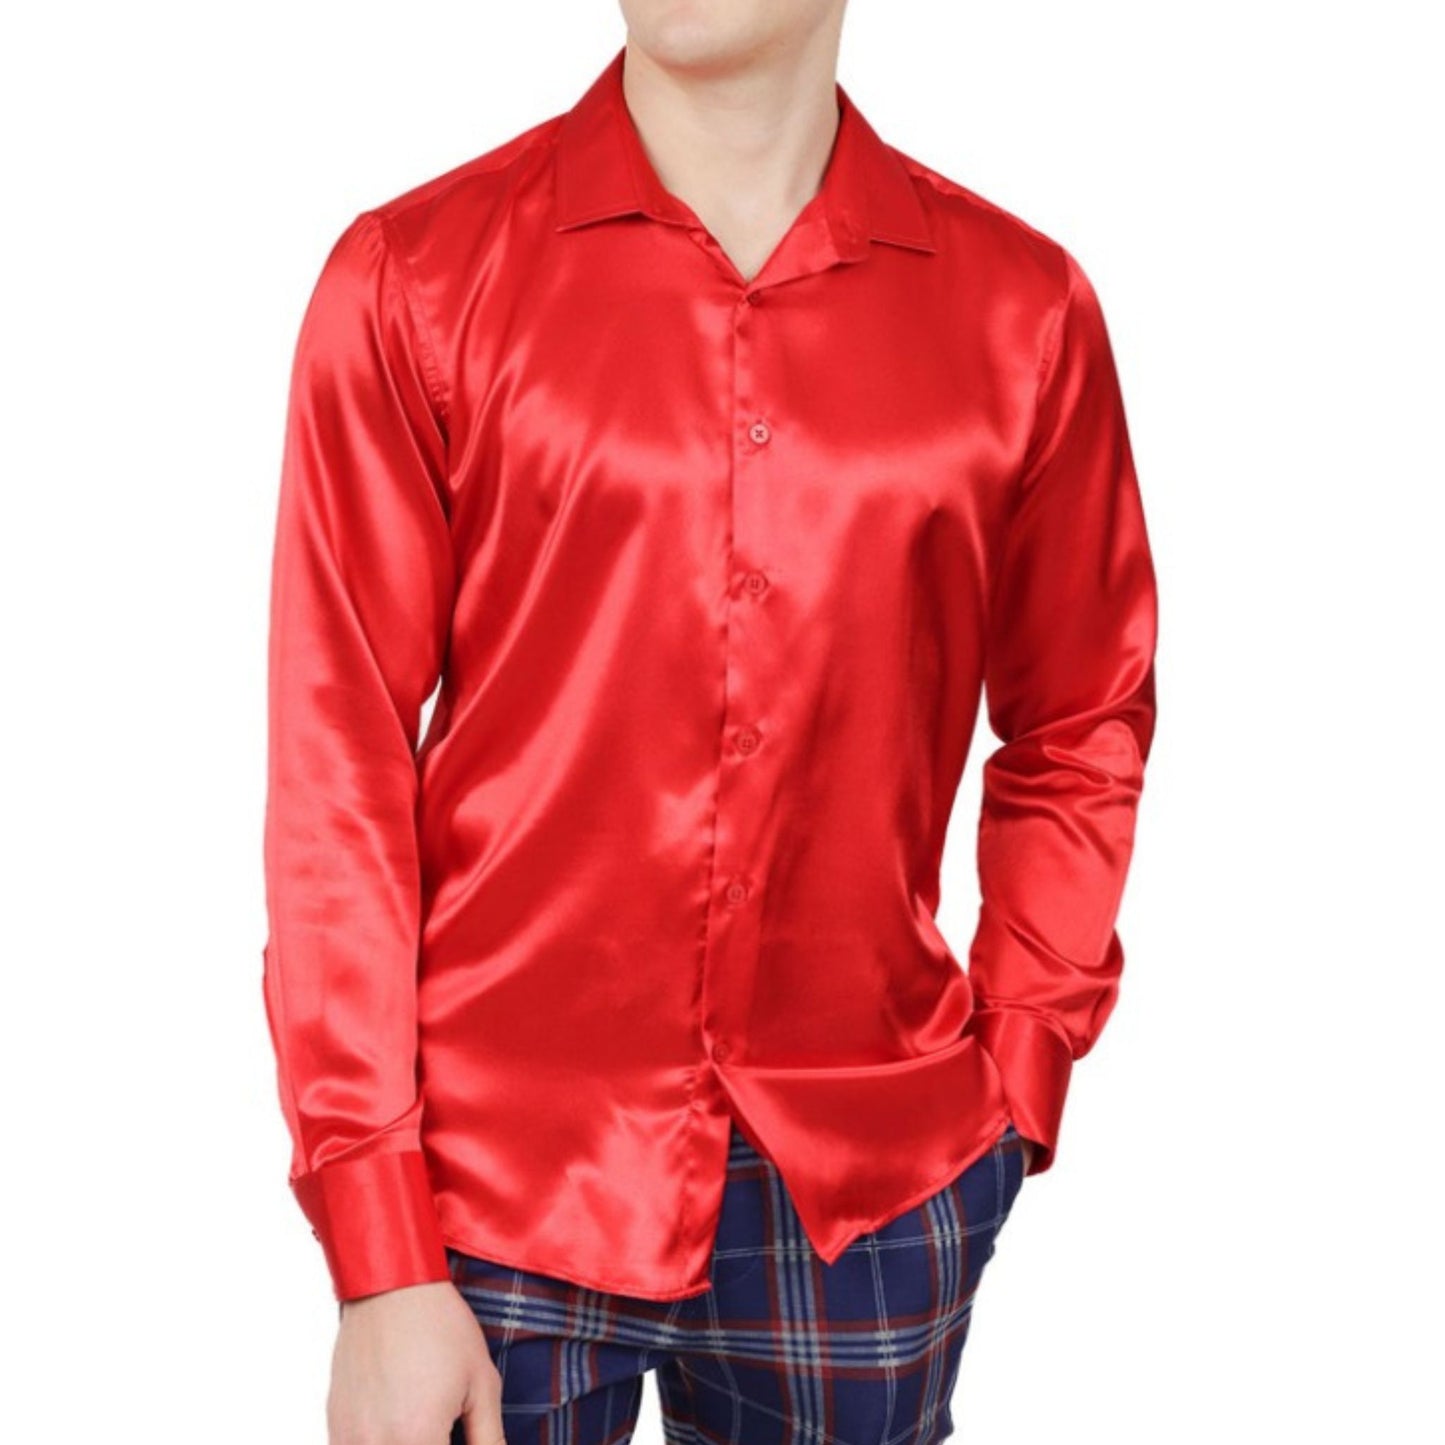 Alt Tag for Product Image: Red Shiny Shirt - Perfect for Formal Events - KCTMenswear.com